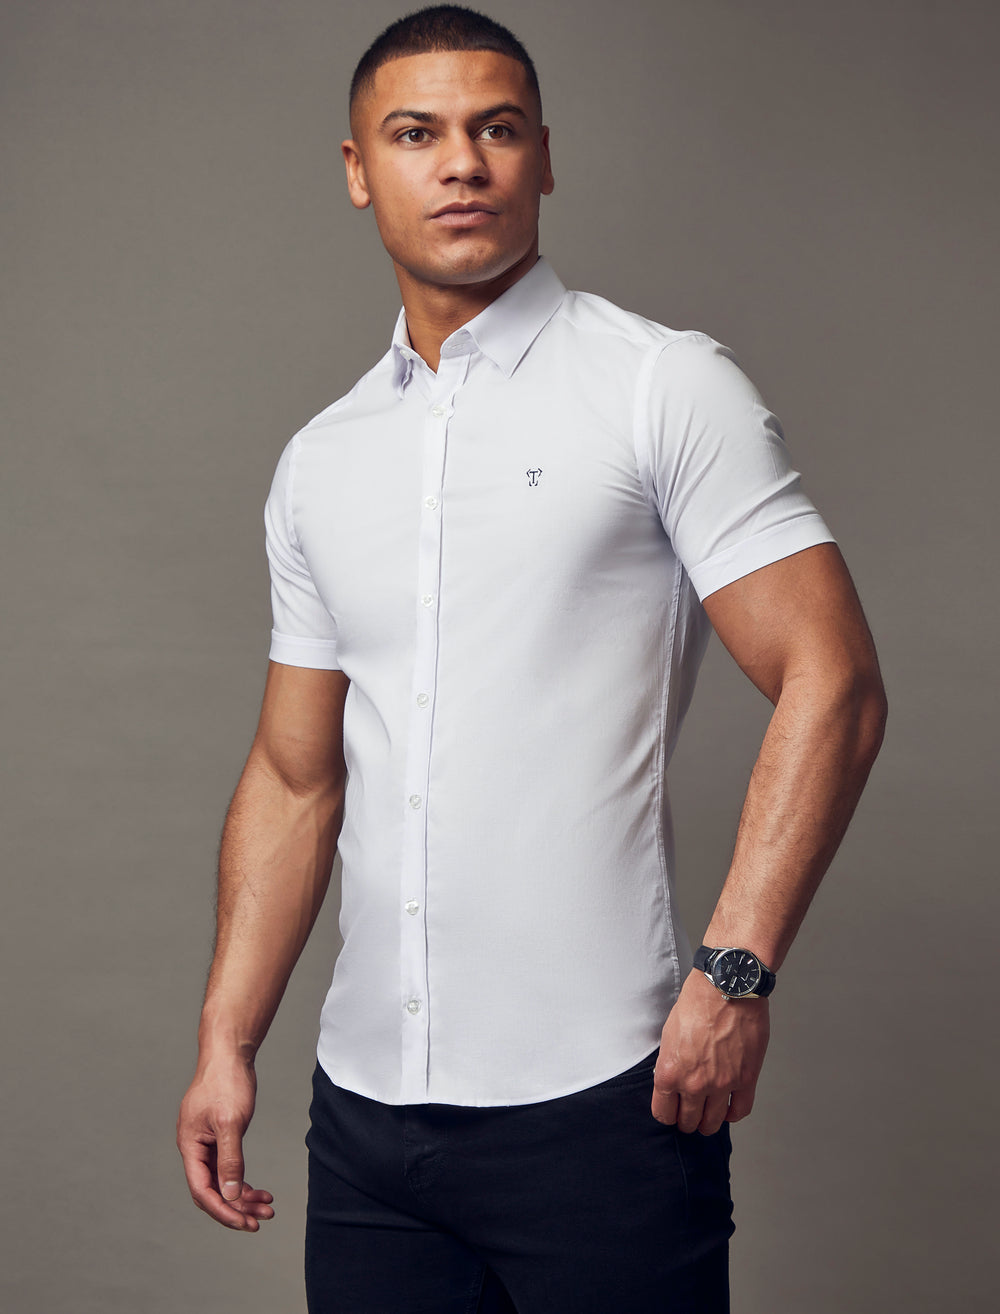 white muscle fit short sleeve shirt, highlighting the tapered fit and premium quality offered by Tapered Menswear